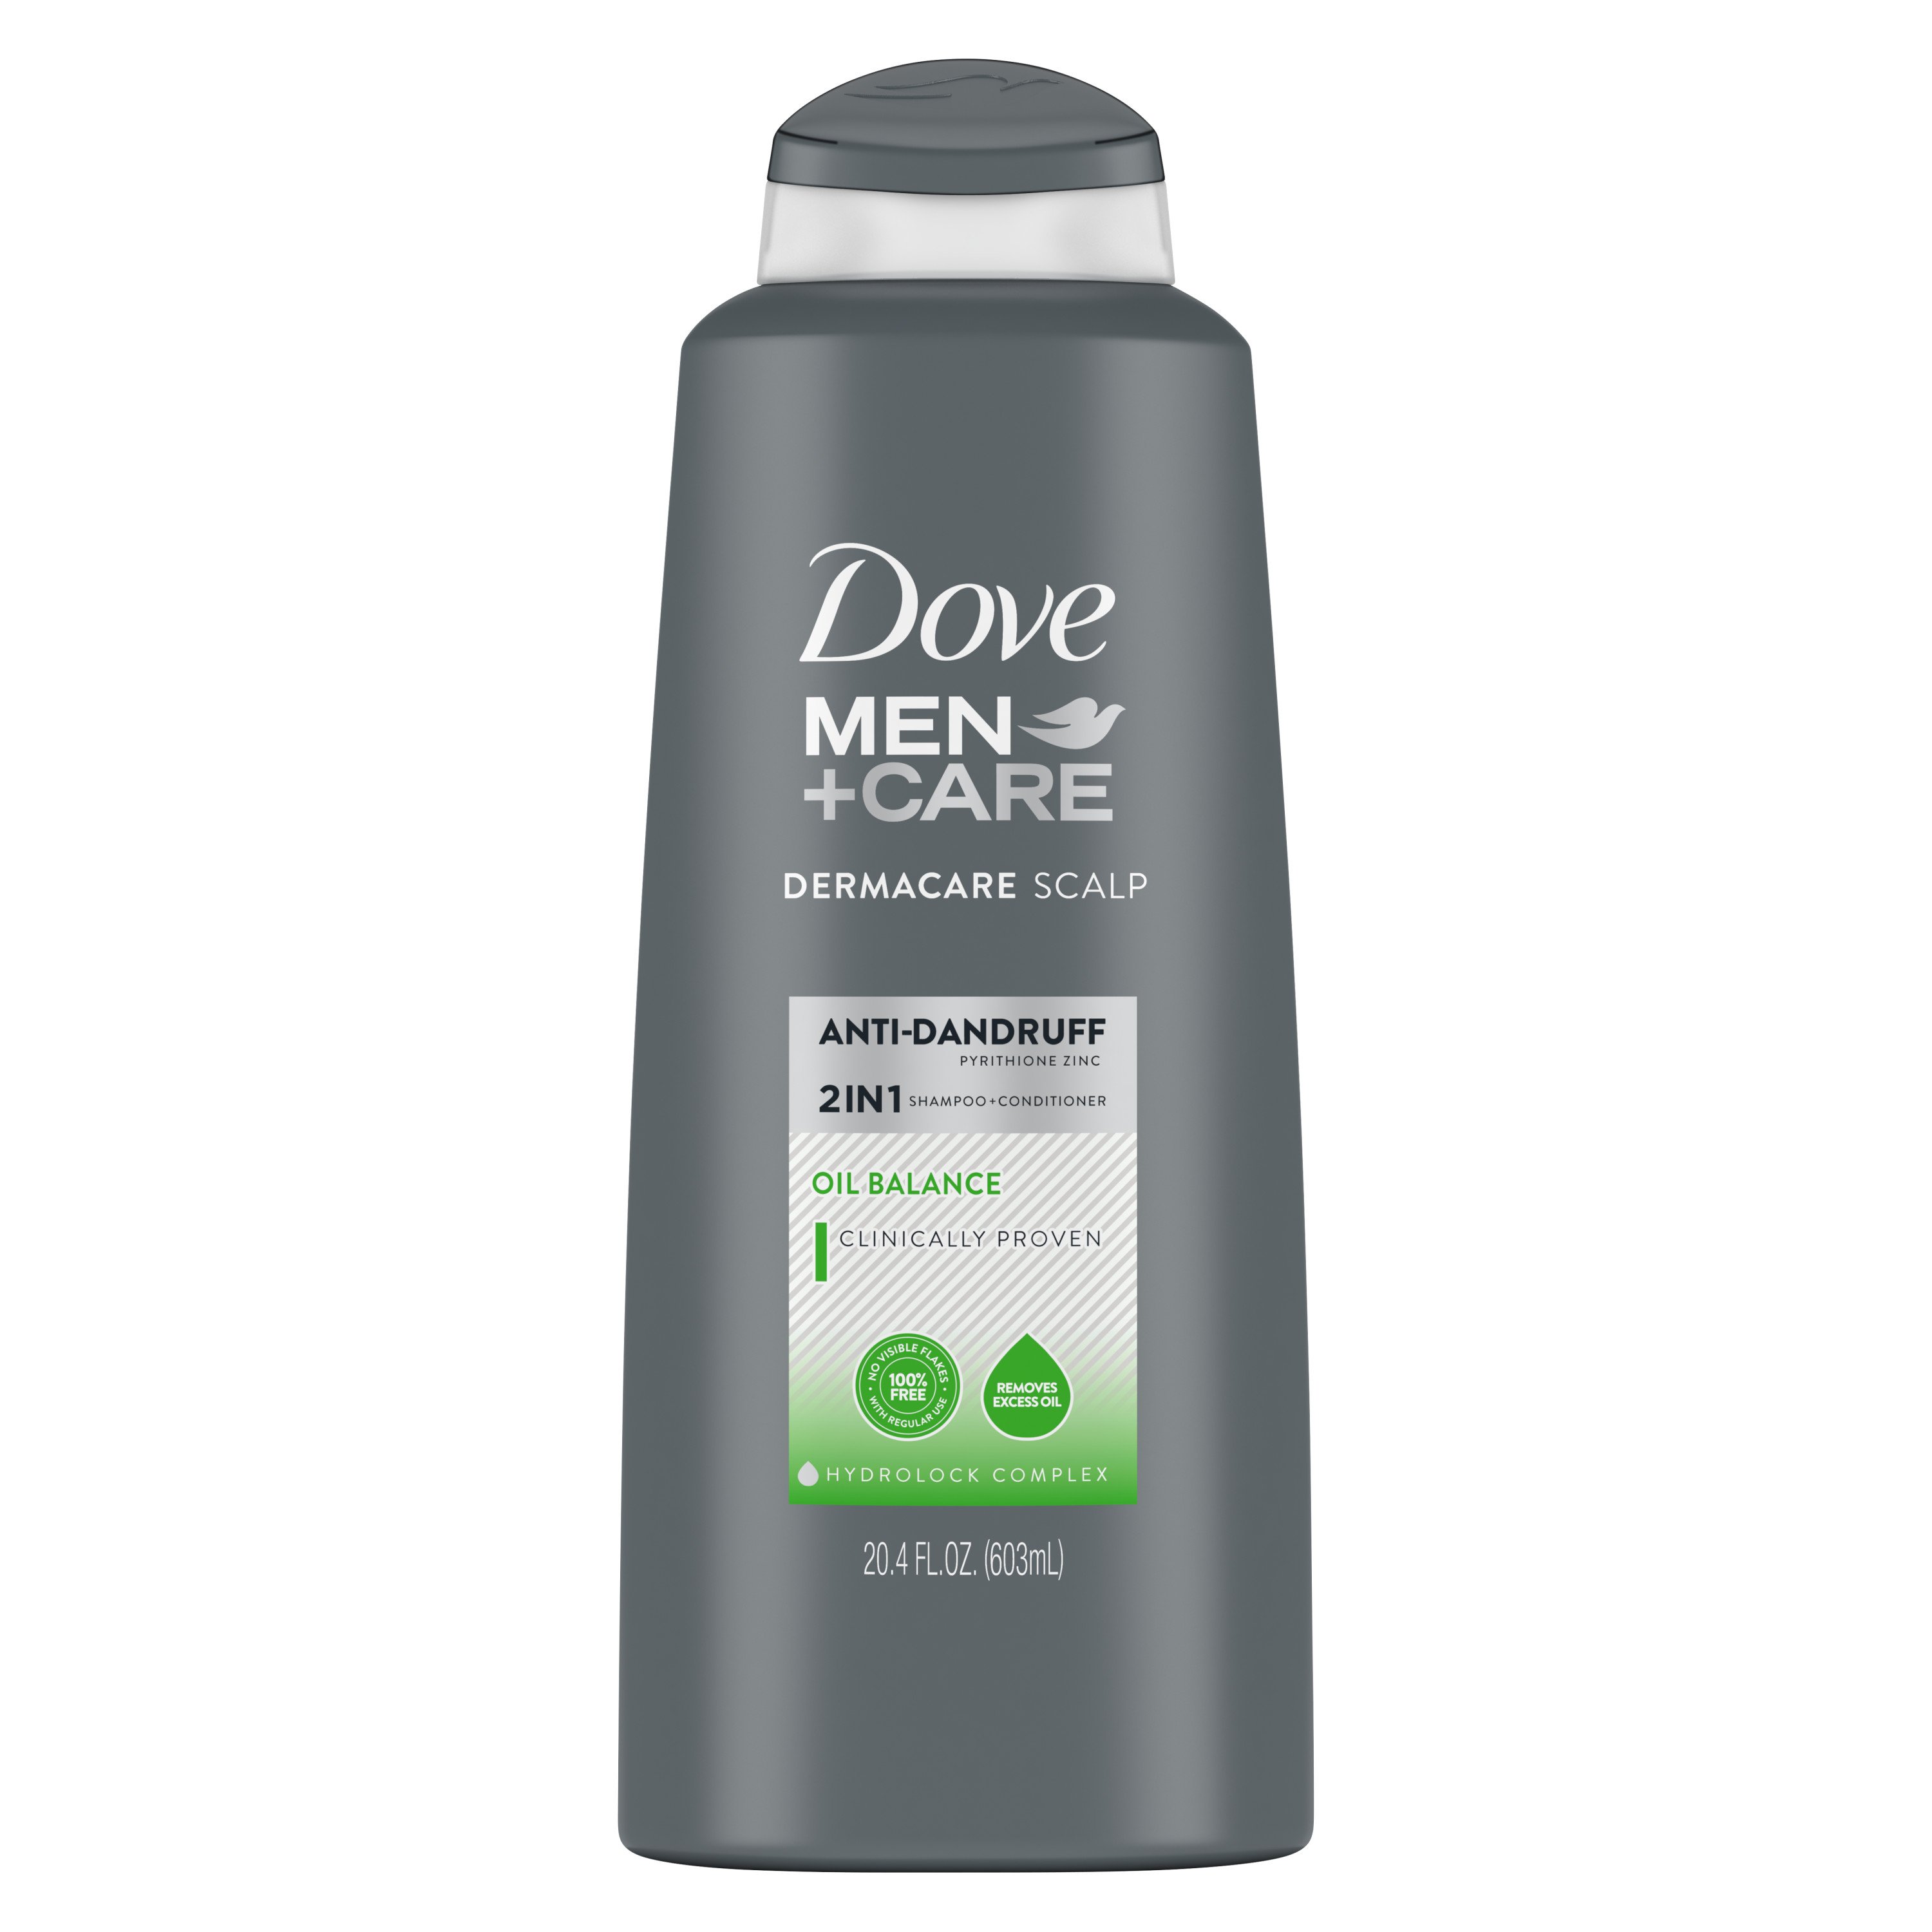 Dove Men+Care DermaCare Scalp Oil Balance 2-in-1 Shampoo and Conditioner -  Shop Hair Care at H-E-B